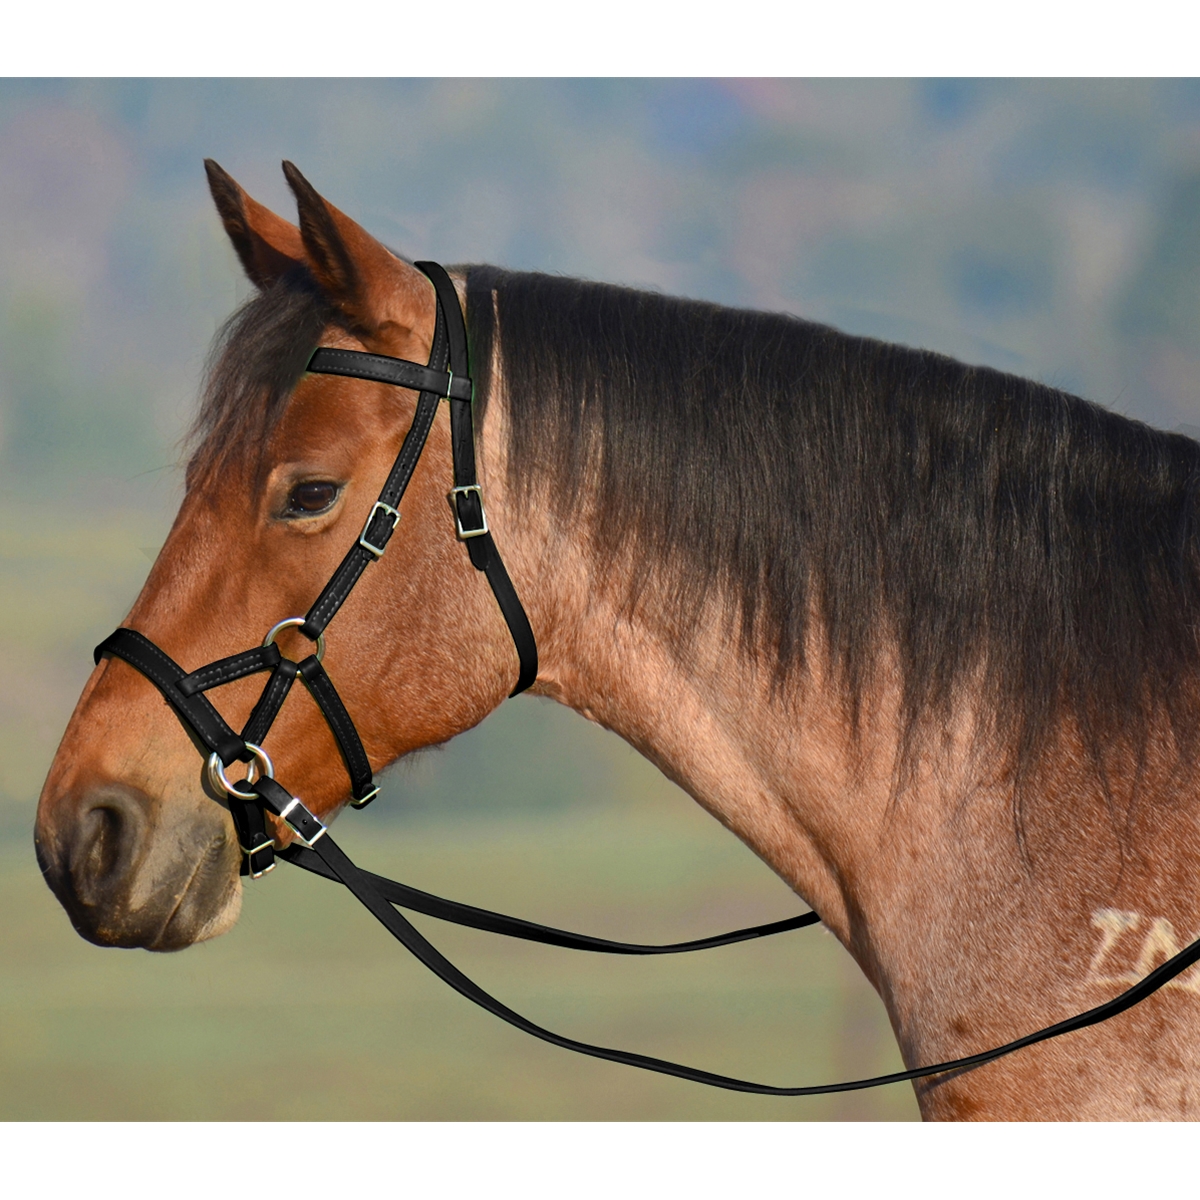 Bitless Bridles Vs Hackamore Read This BEFORE You Buy One, 57% OFF